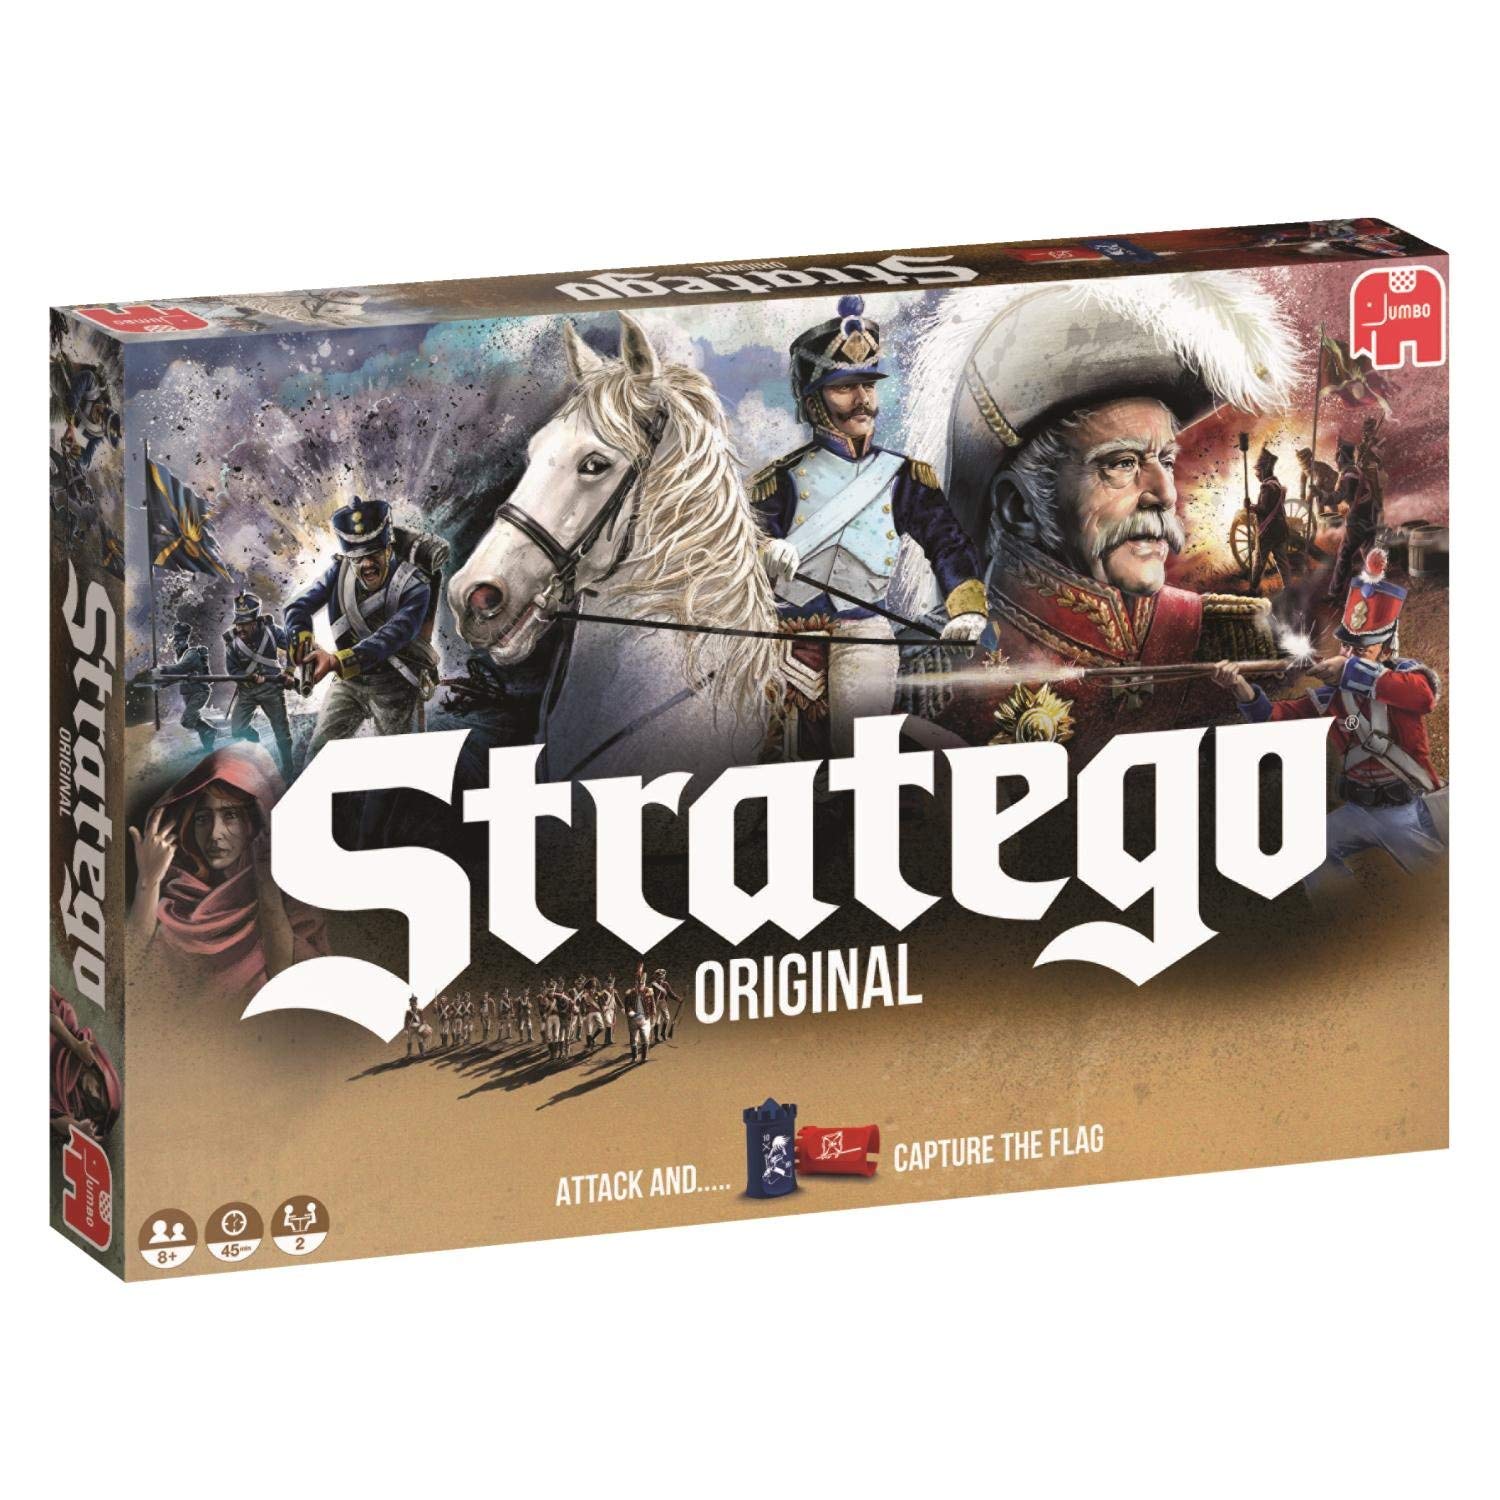 stratego board game pieces